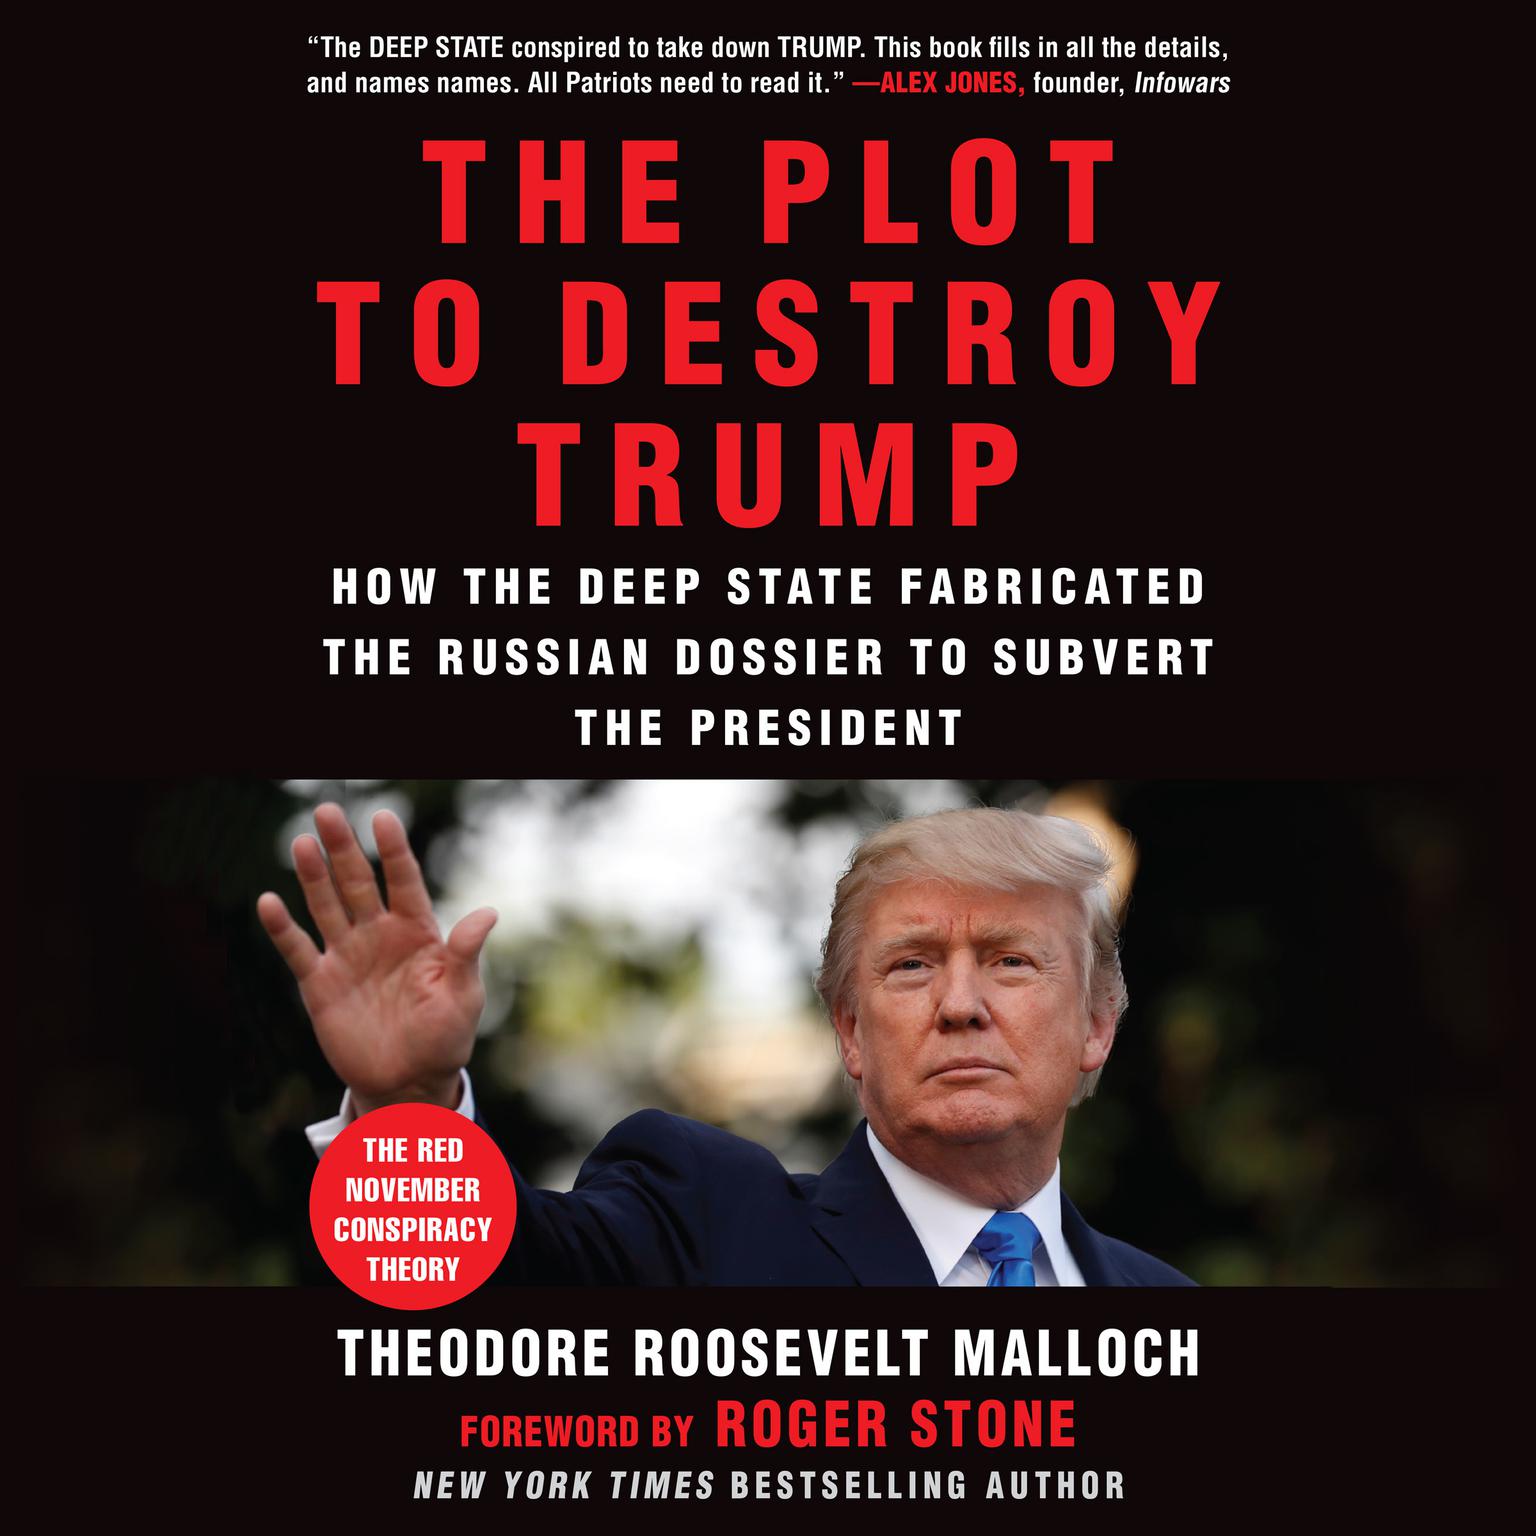 The Plot to Destroy Trump: How the Deep State Fabricated the Russian Dossier to Subvert the President Audiobook, by Theodore Roosevelt Malloch